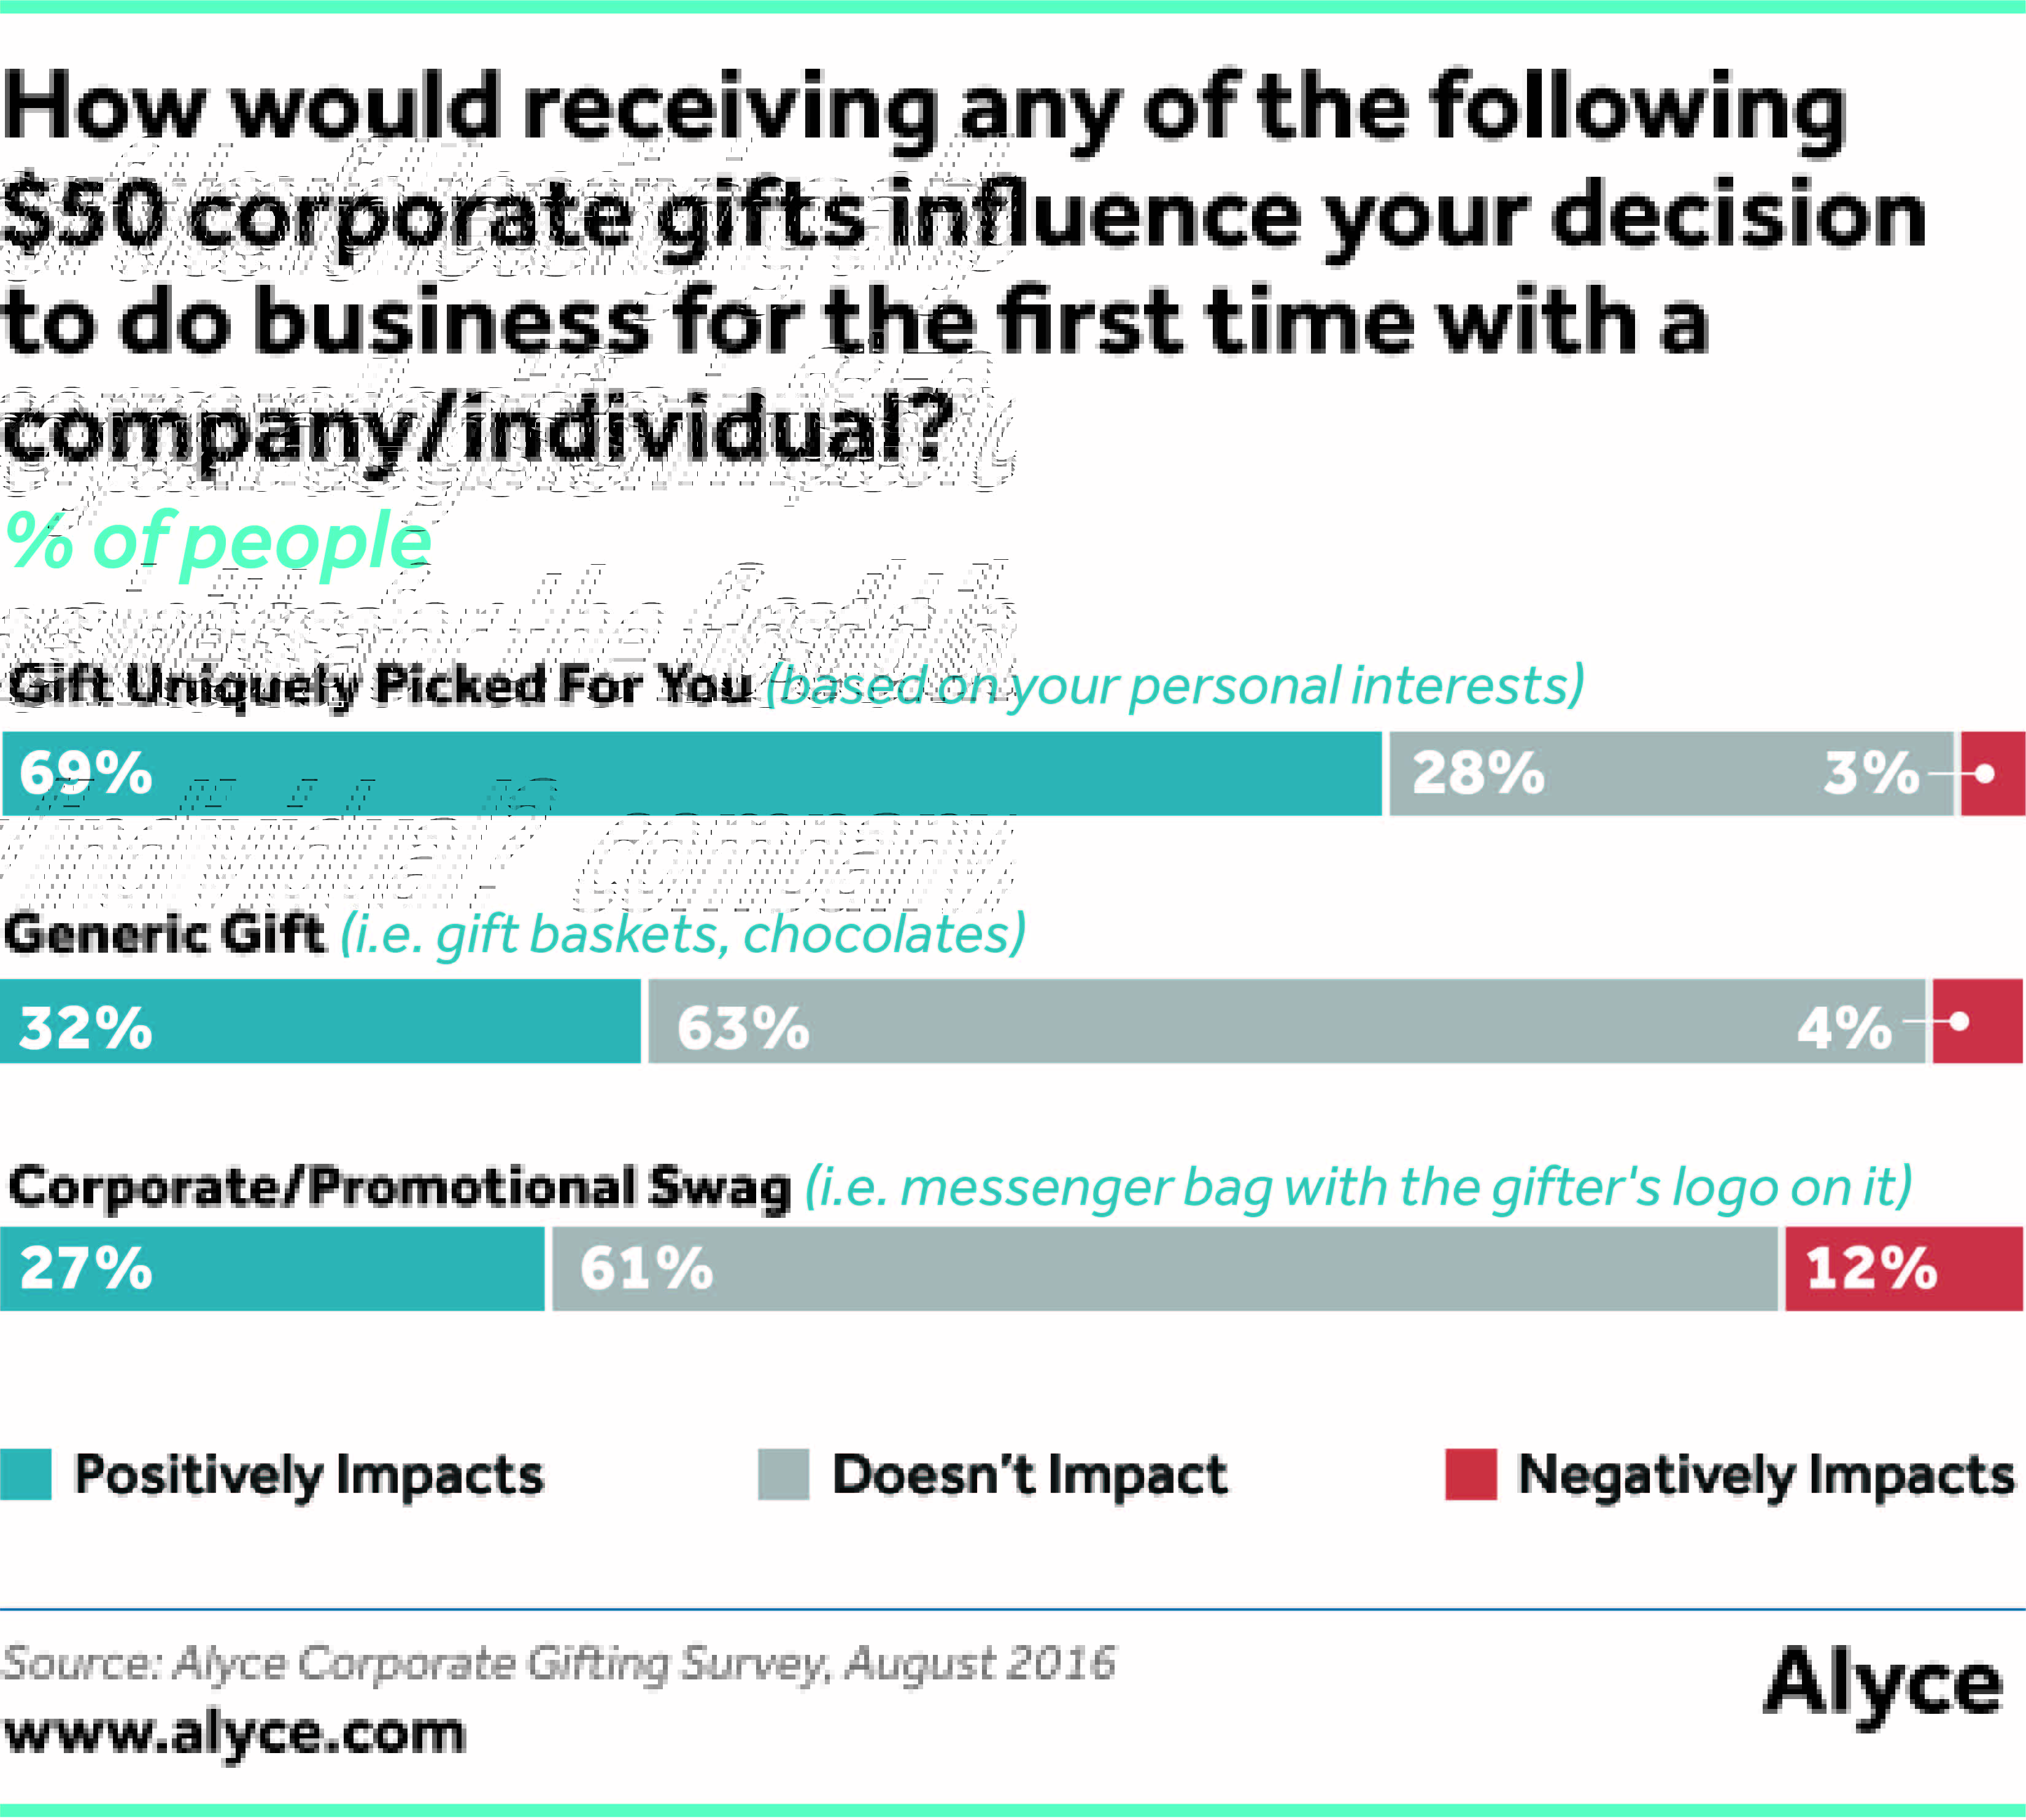 How would receiving any of the following $50 corporate gifts influence your decision to do business for the first time (i.e. purchase, sign-up, etc.) with a company/individual?